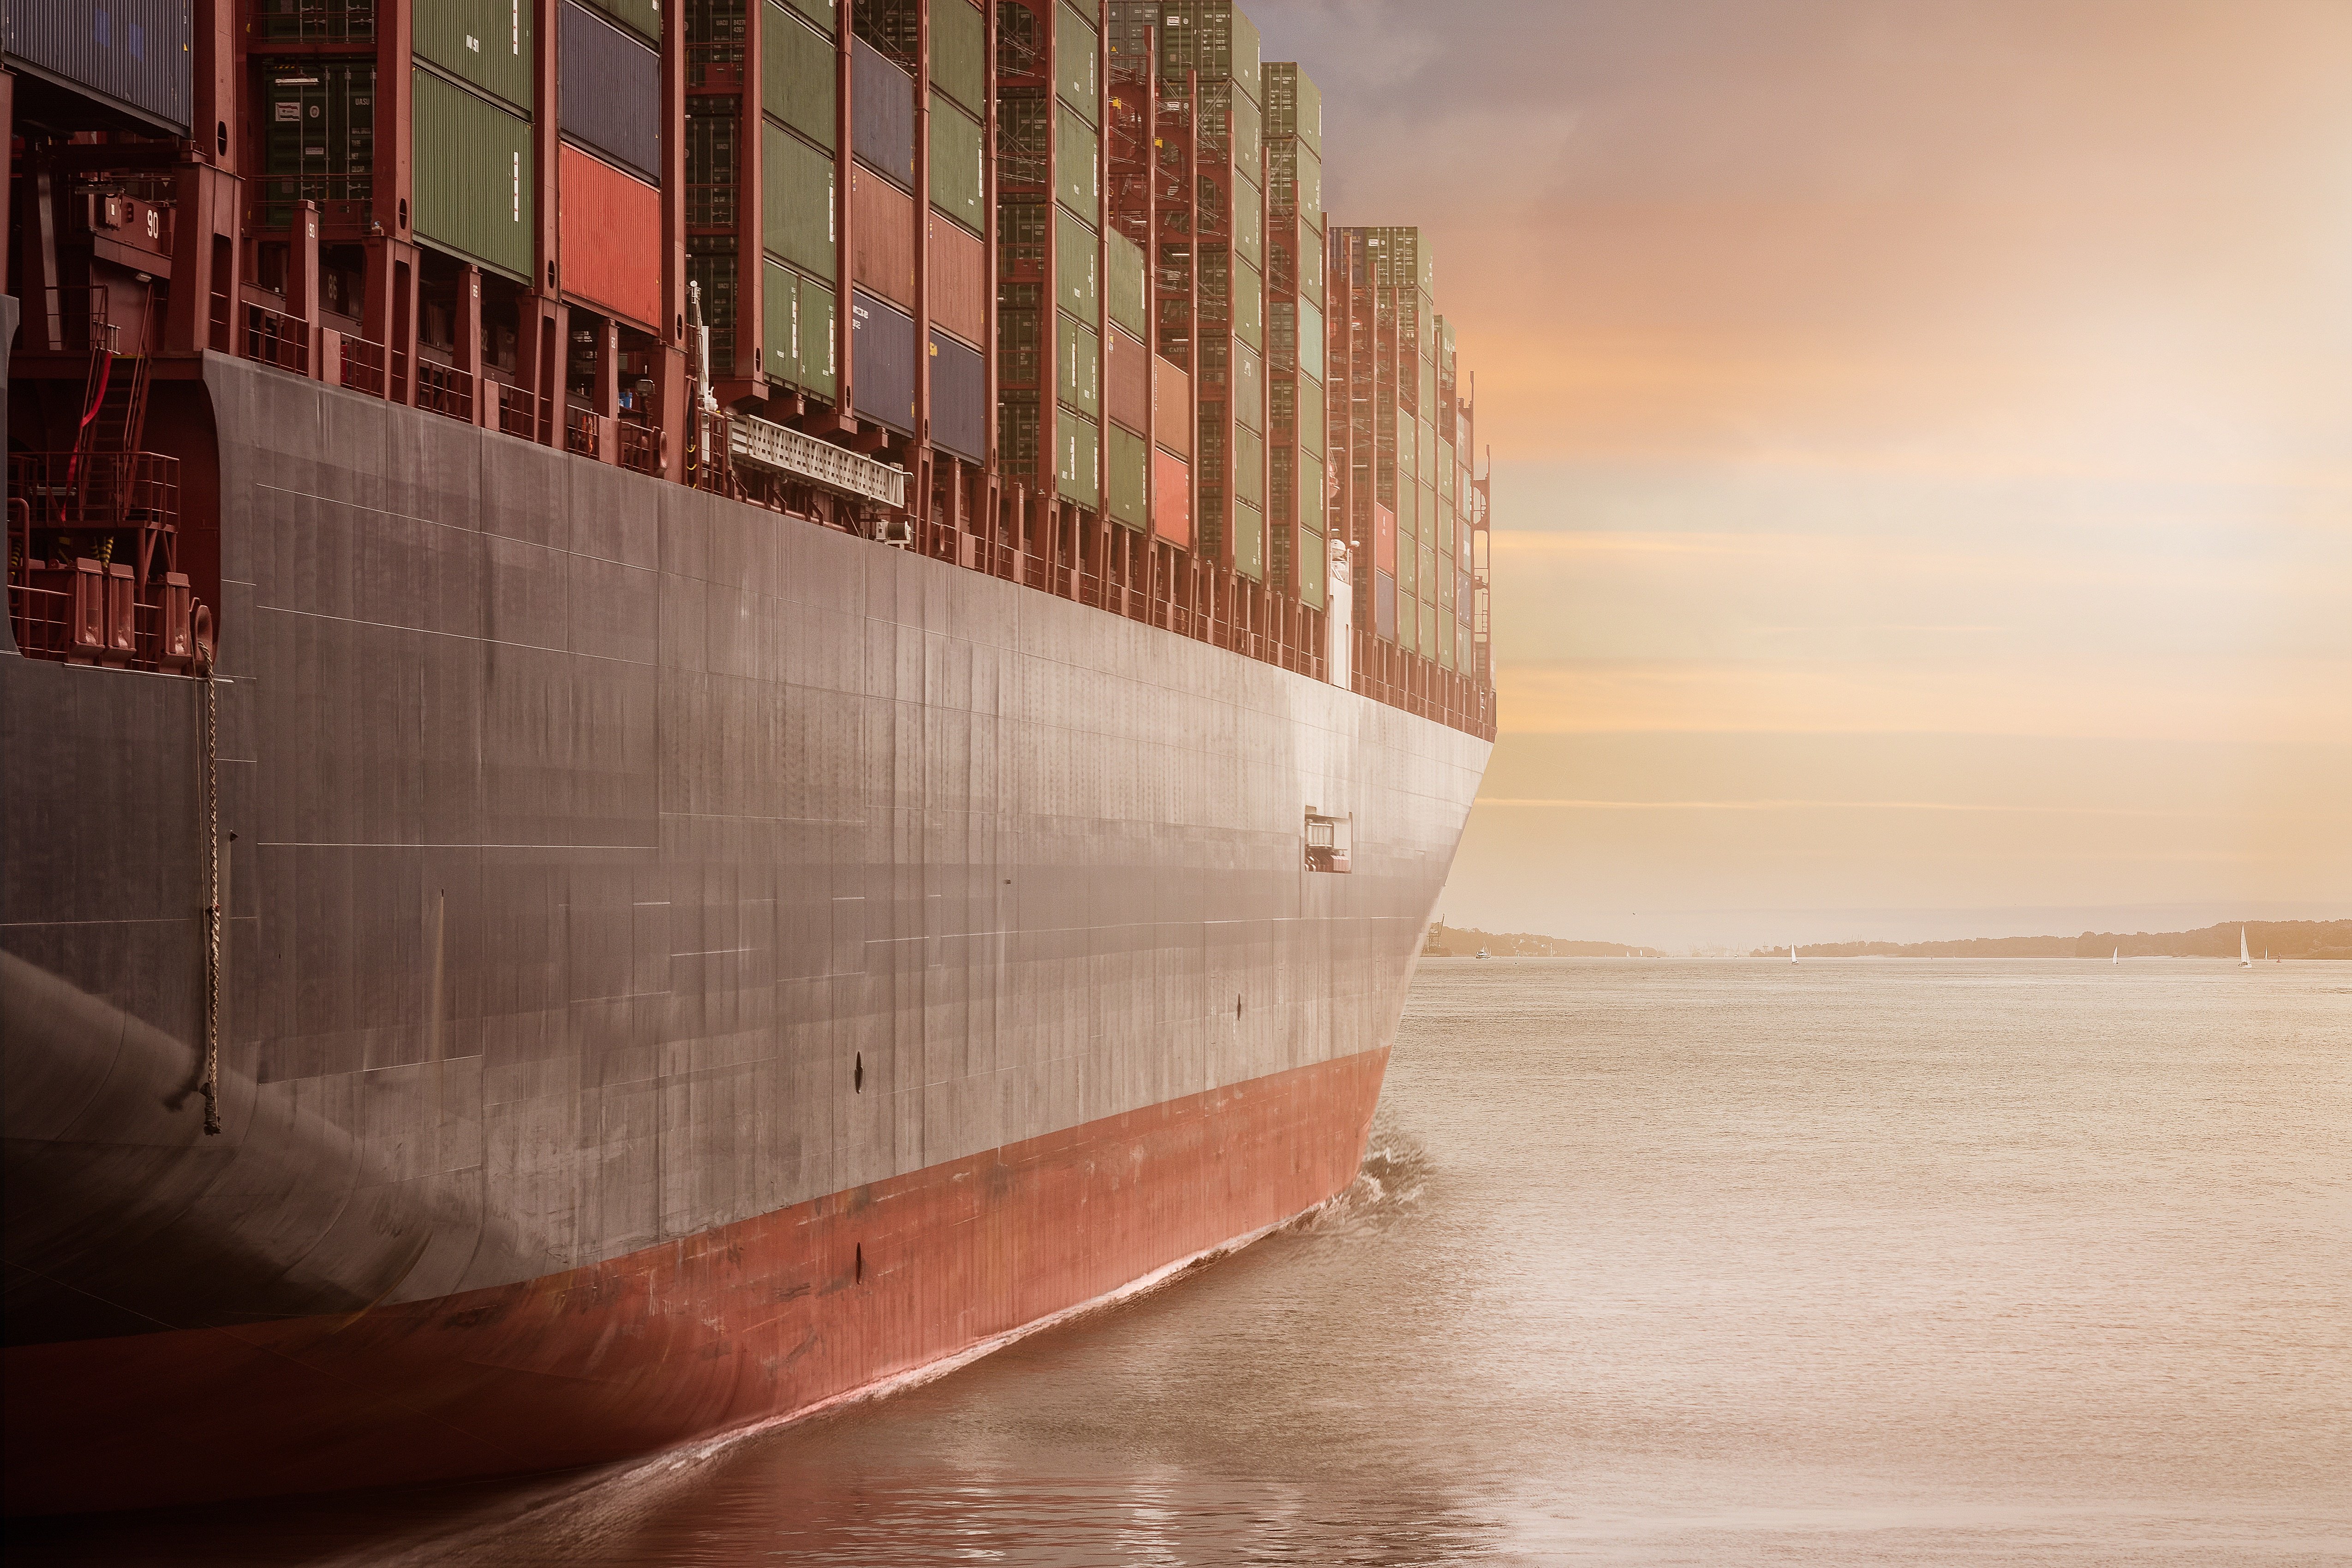 A sustainable maritime industry in a 2°C scenario - has the ship already sailed?